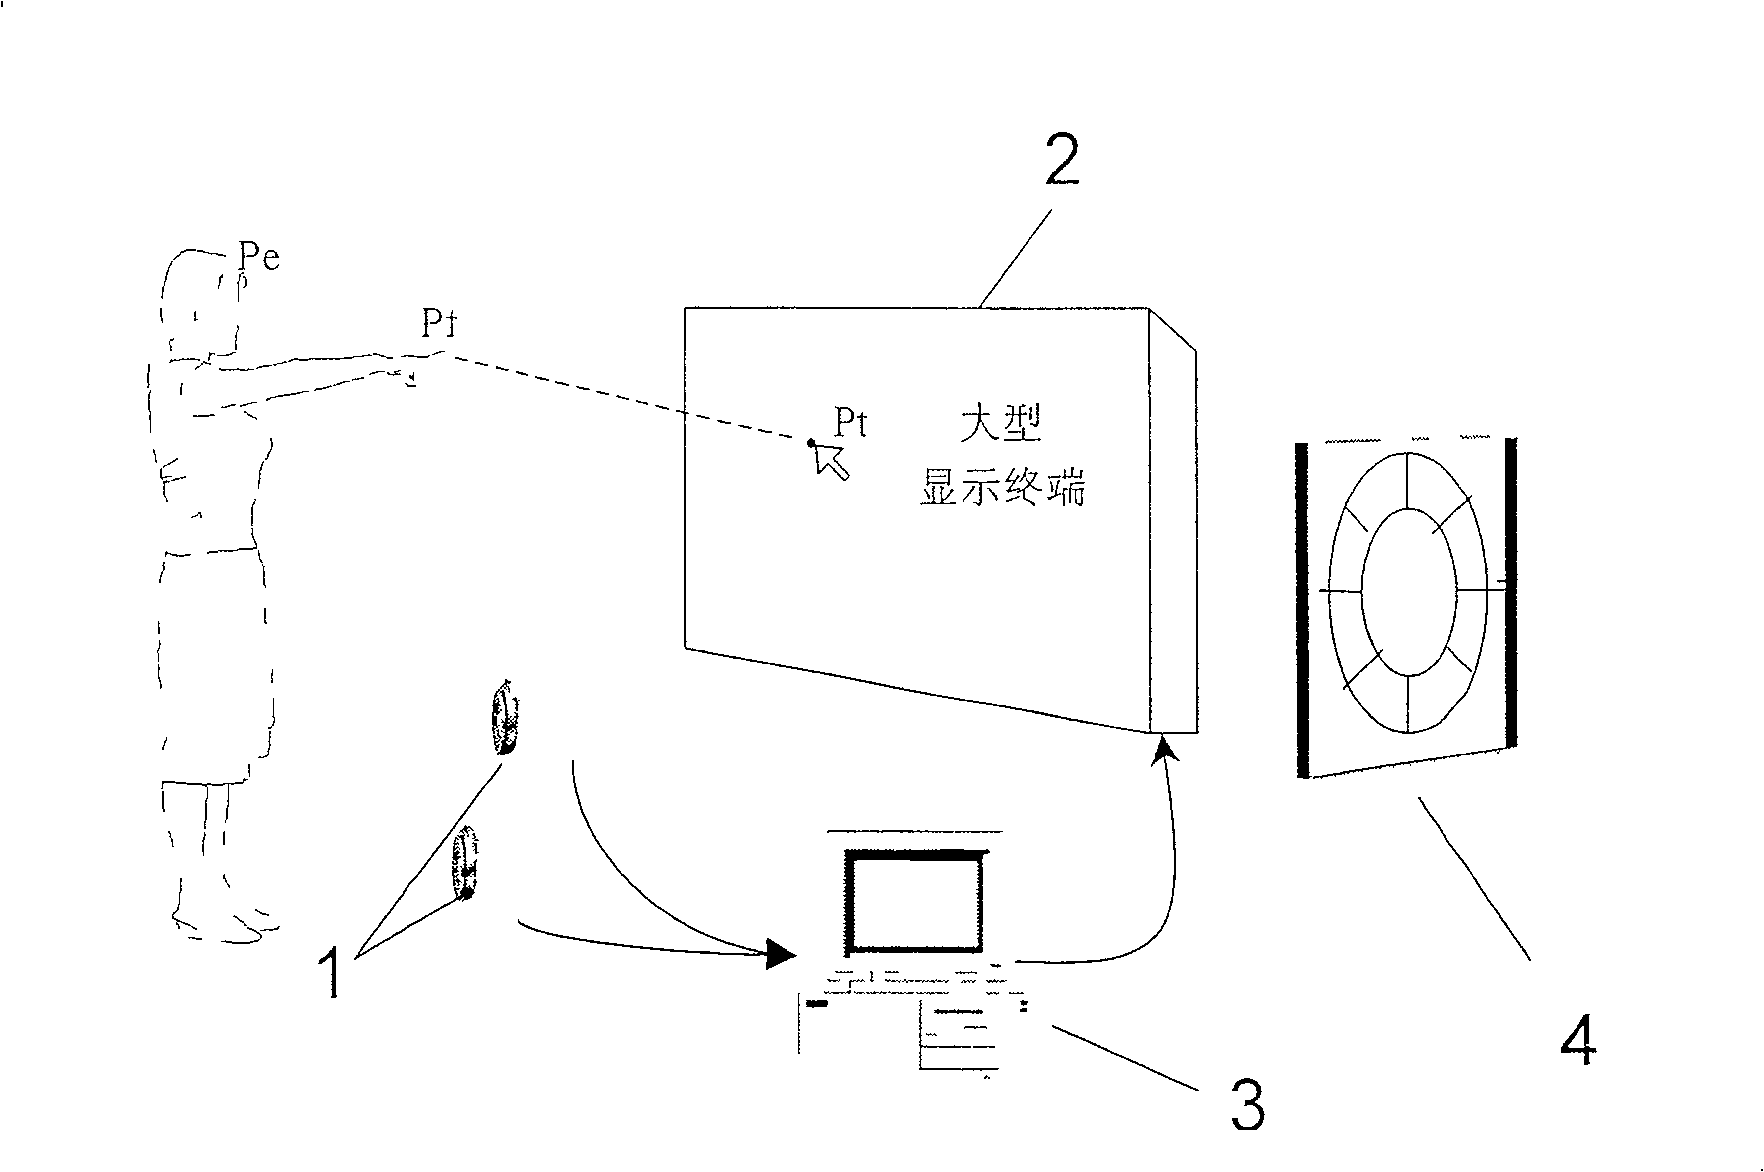 System and method of contactless position input by hand and eye relation guiding